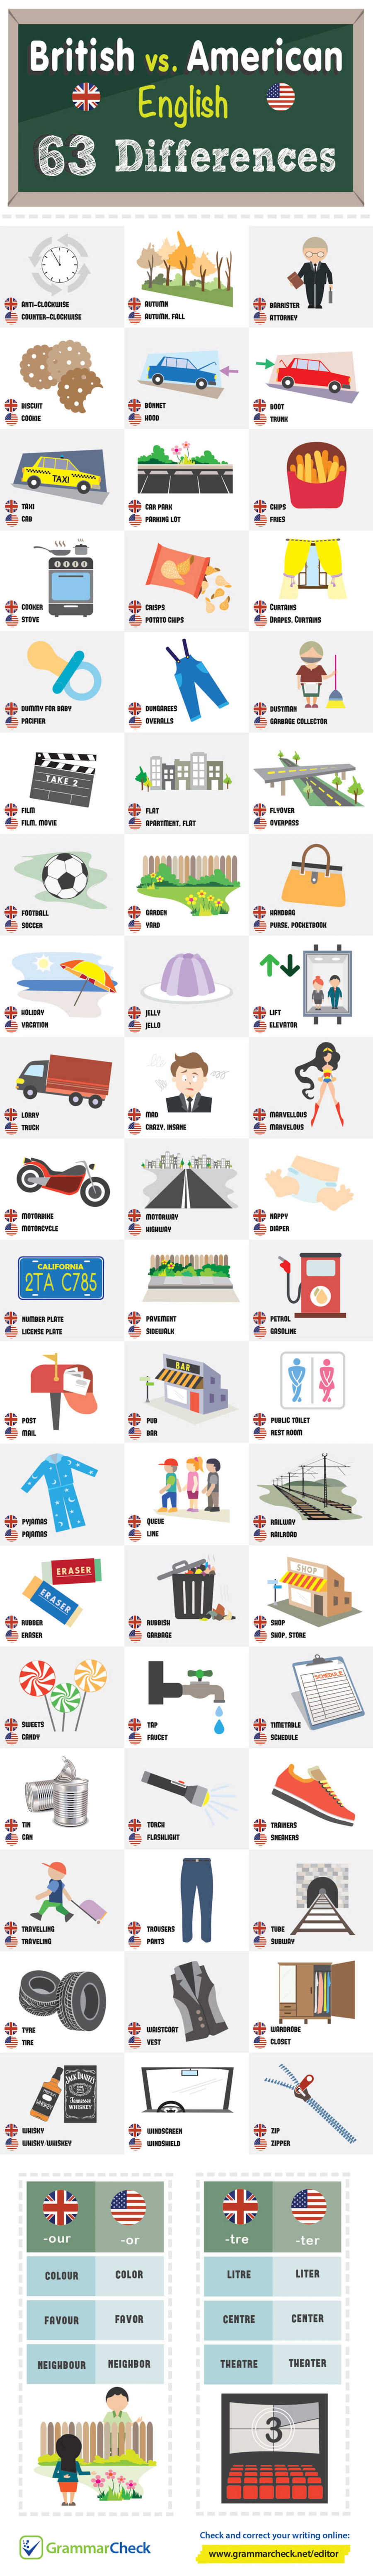 Differences Between British and American English Infographic by Grammar Check